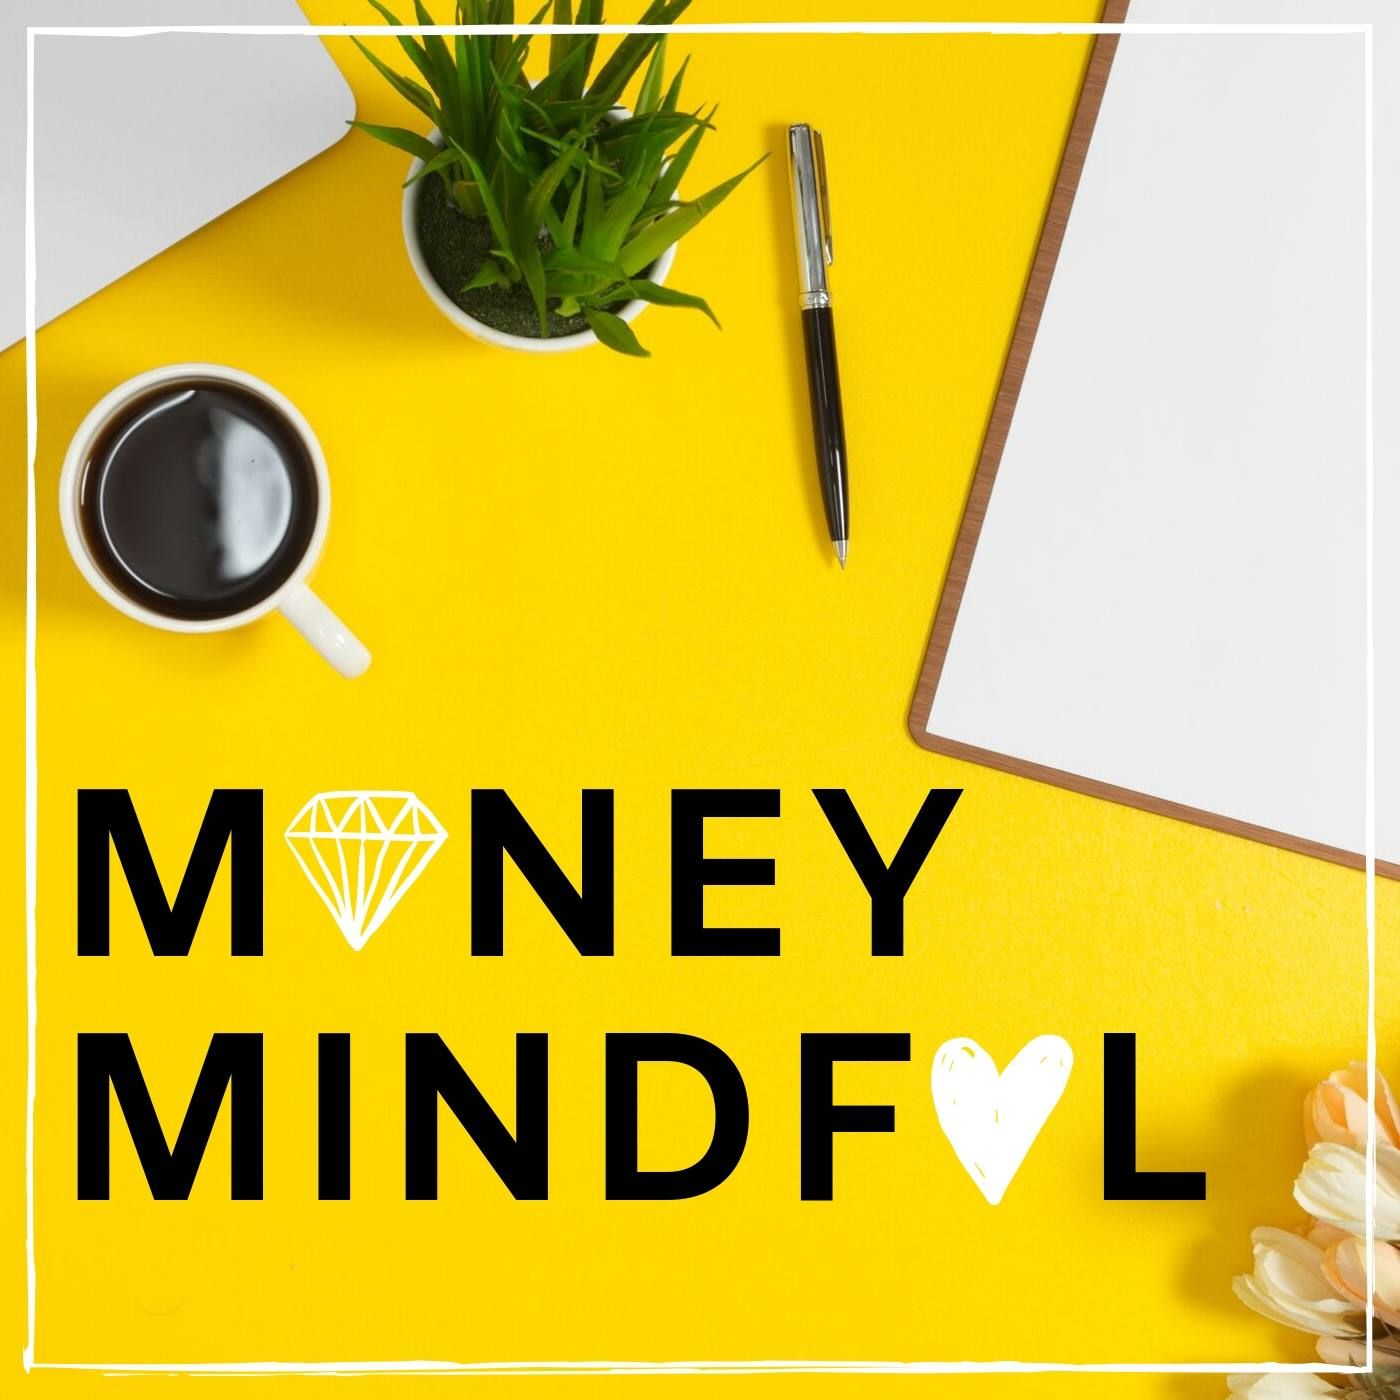 Are you prioritising money over your personal health and wellbeing